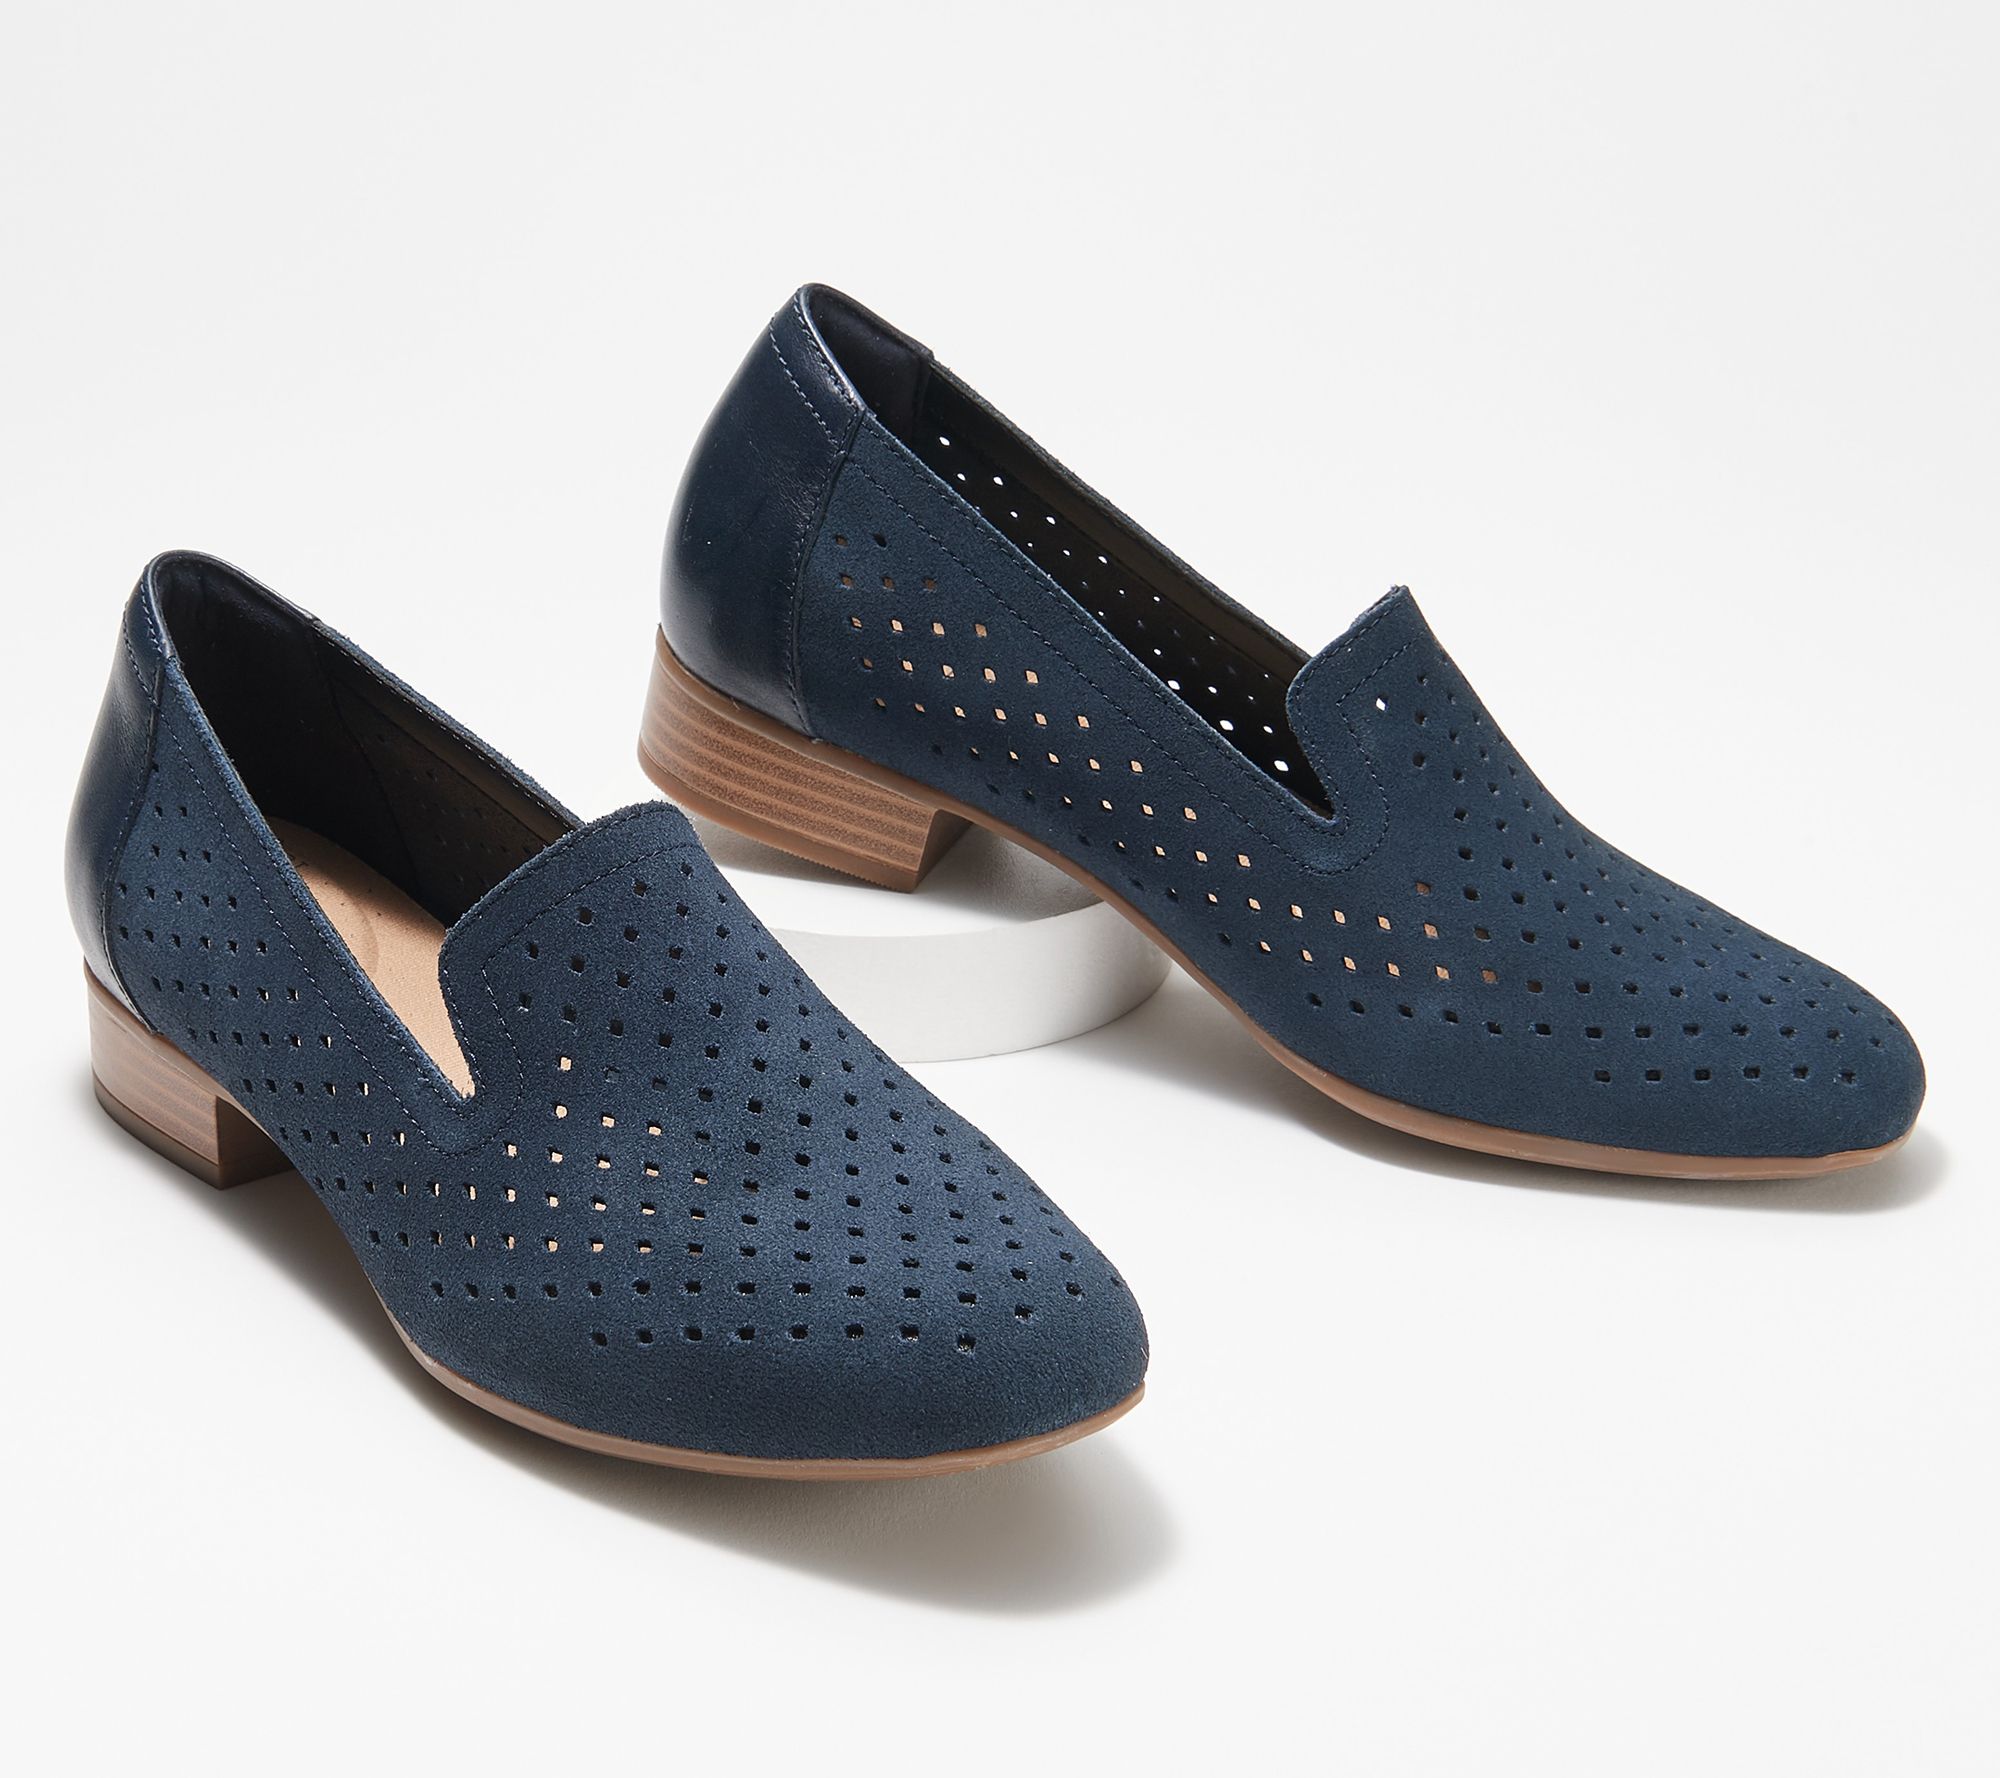 Clarks Collection Perforated Suede Loafers - Juliet QVC.com